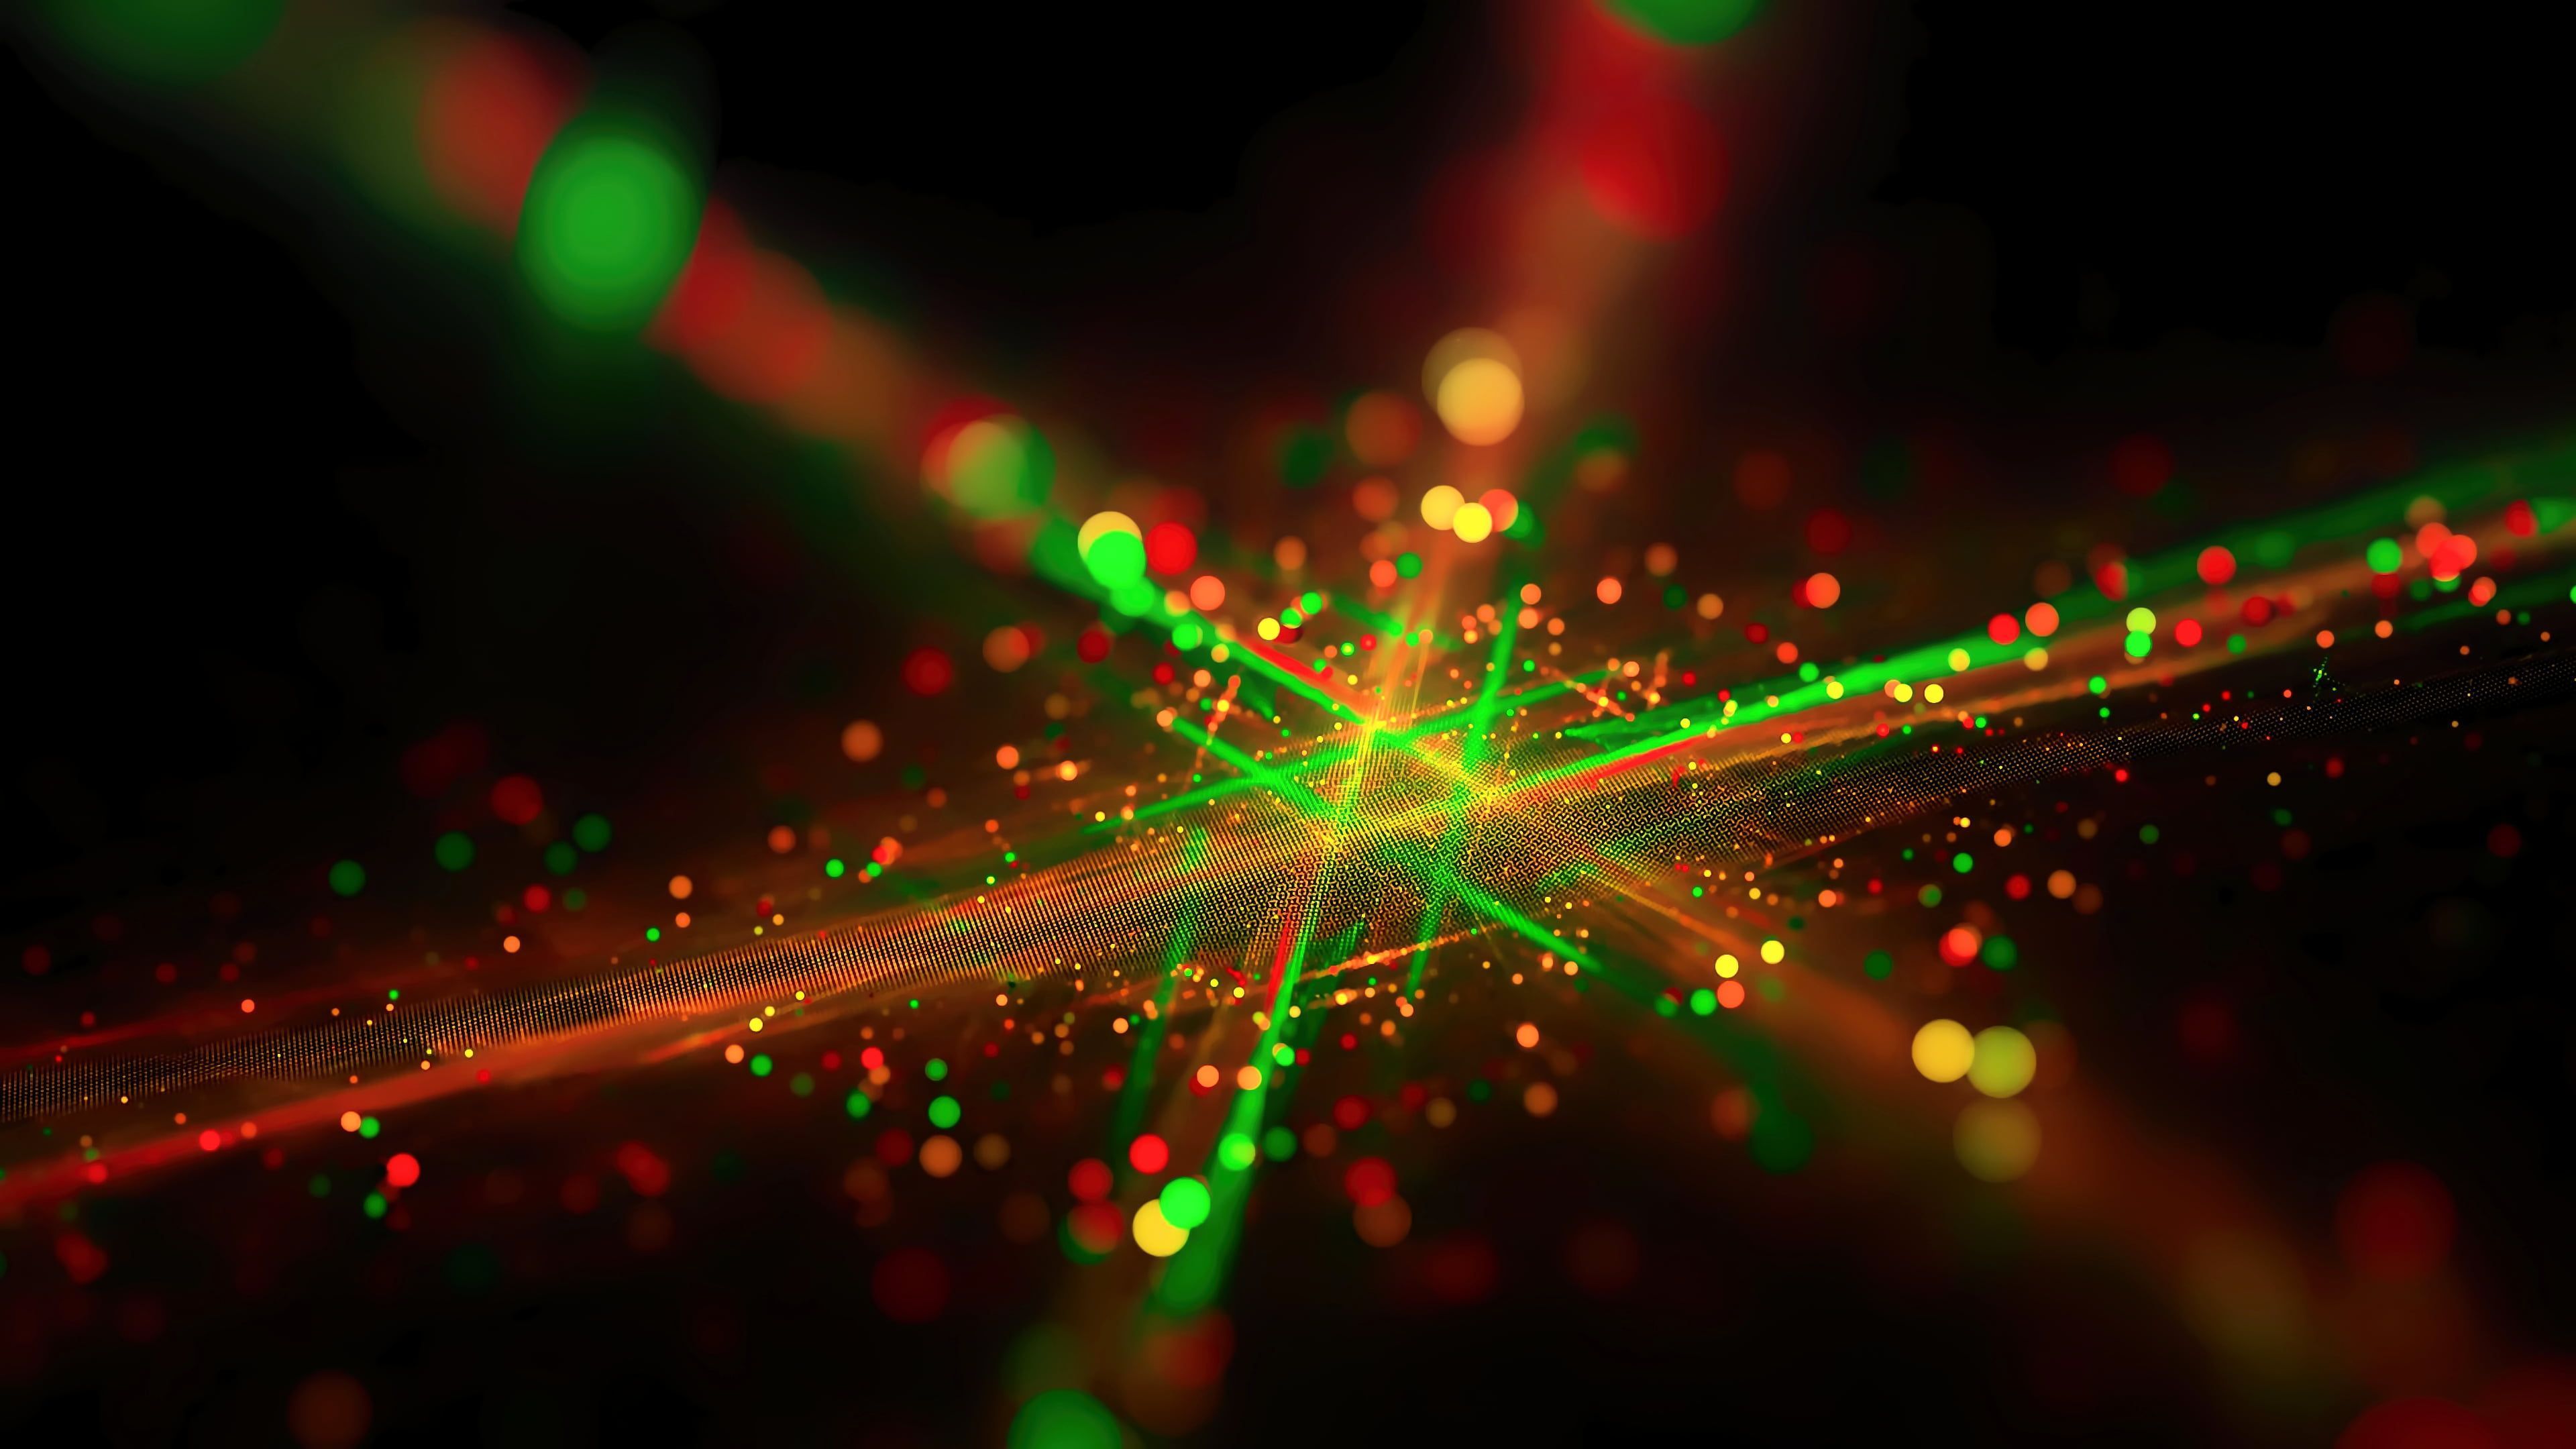 green and red light digital wallpaper, bokeh photograph of laser lights #abstrac. and red light digital. Digital wallpaper, Bokeh wallpaper, Wallpaper